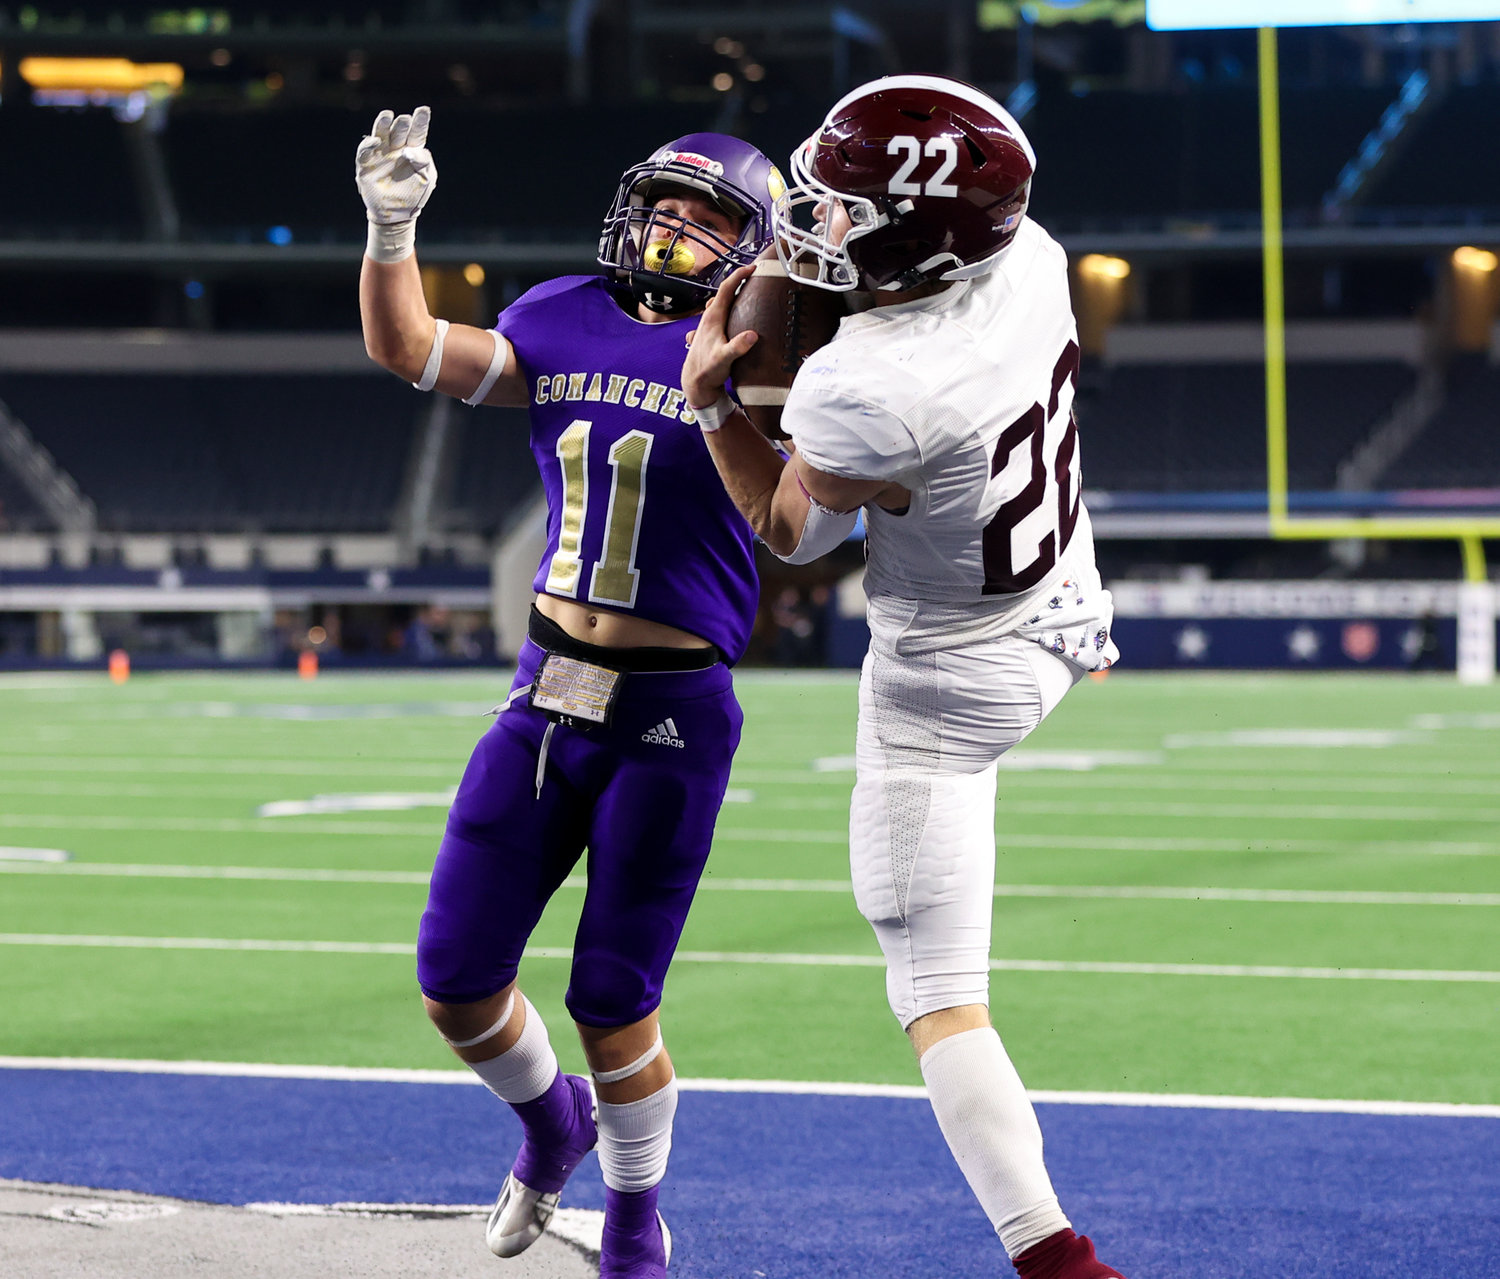 Hawley Bearcats junior Will Scott (22) brings in a touchdown catch during the Class 2A Division I state football championship game between Shiner and Hawley on December 15, 2021 in Arlington, Texas.